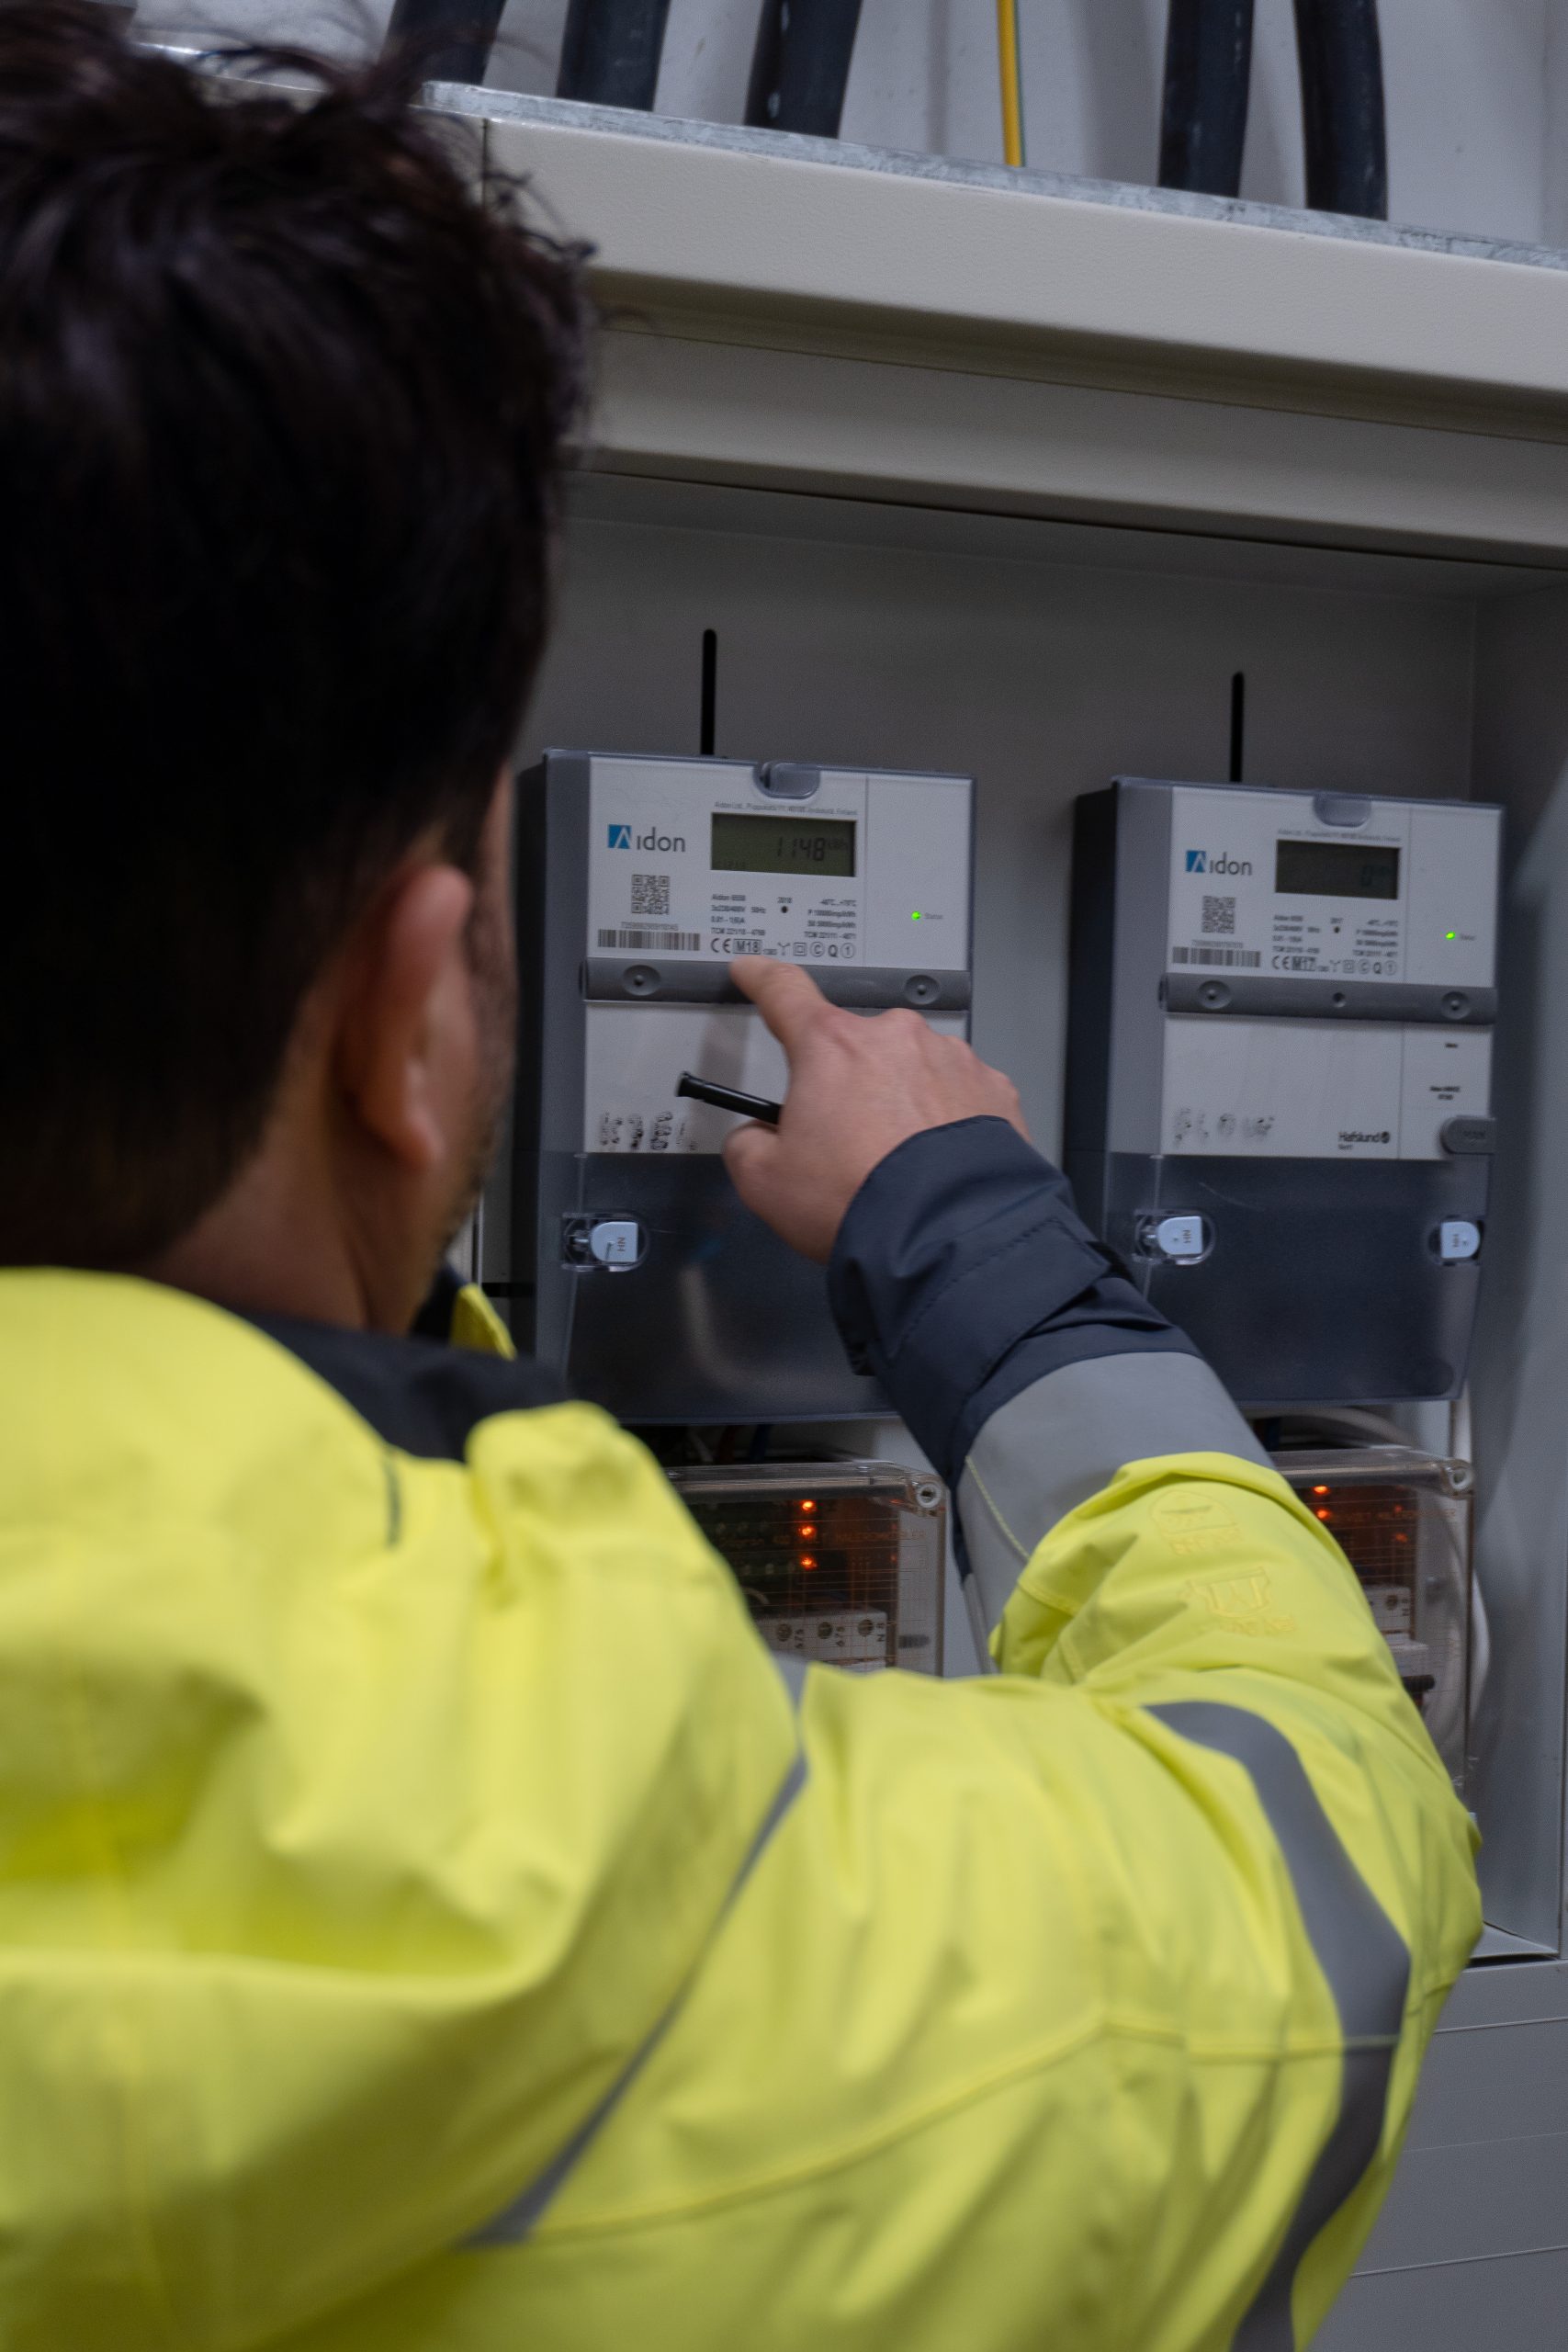 Man in high visibility checking electricity meter